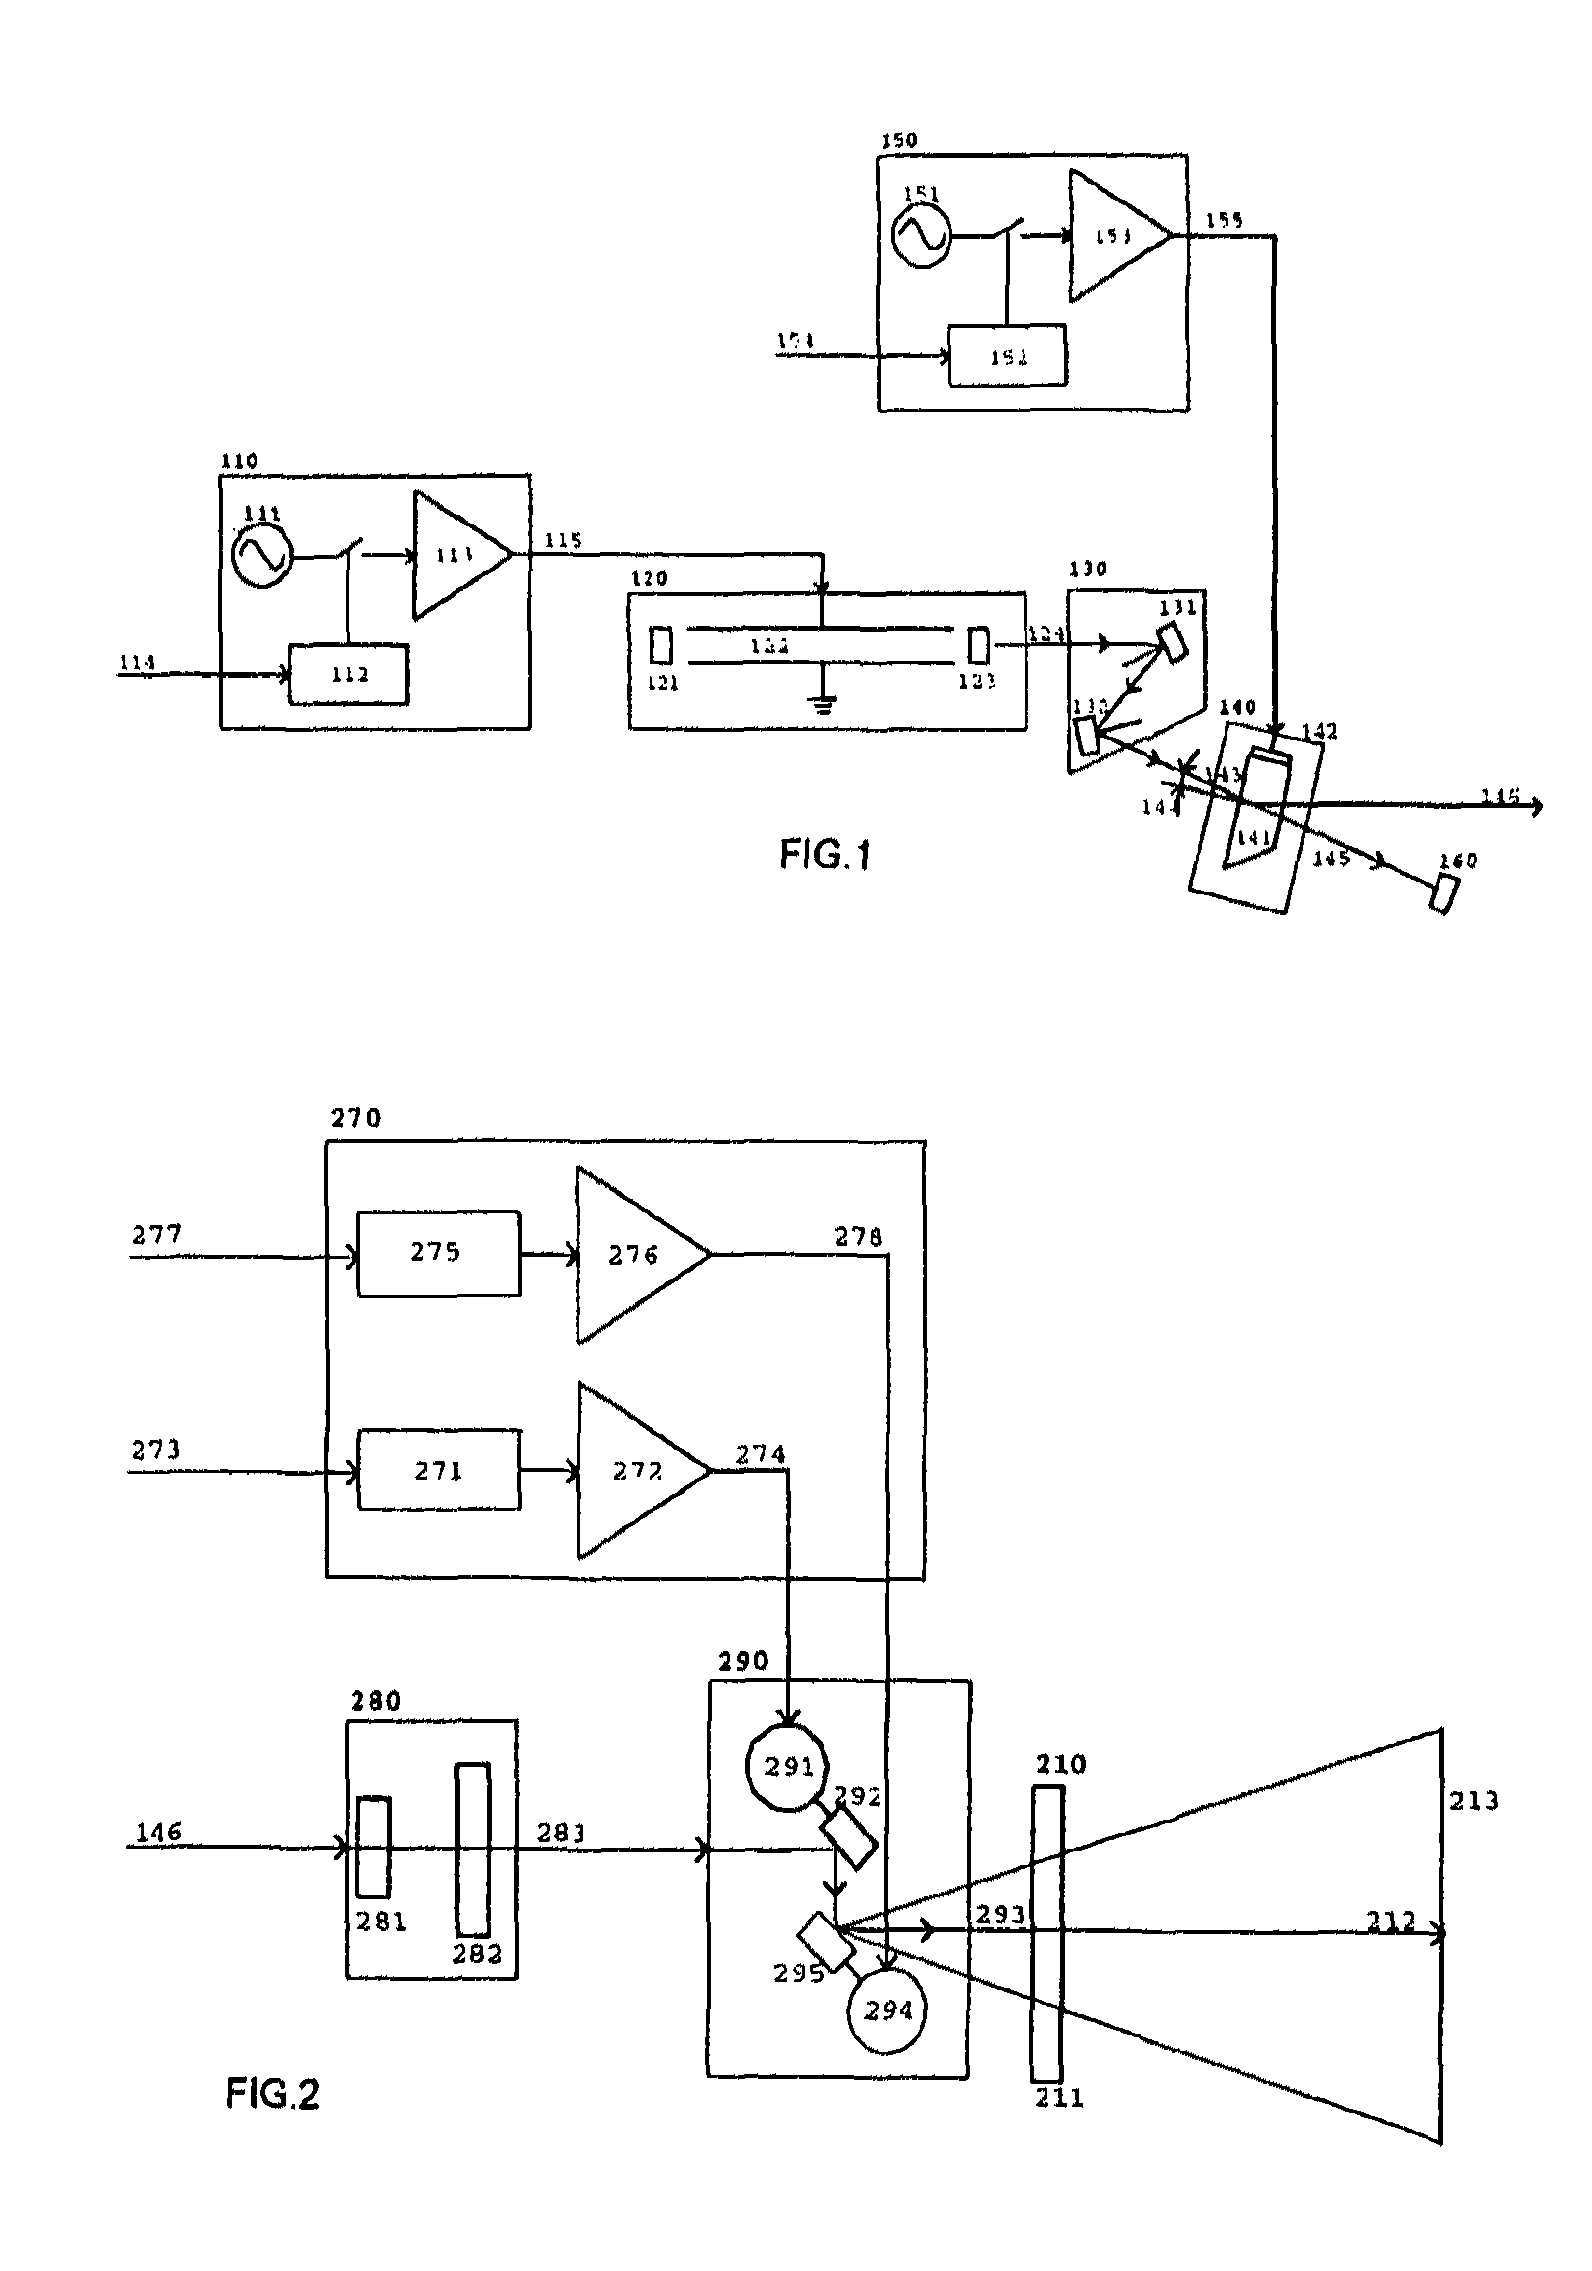 Method and device for rotational marking